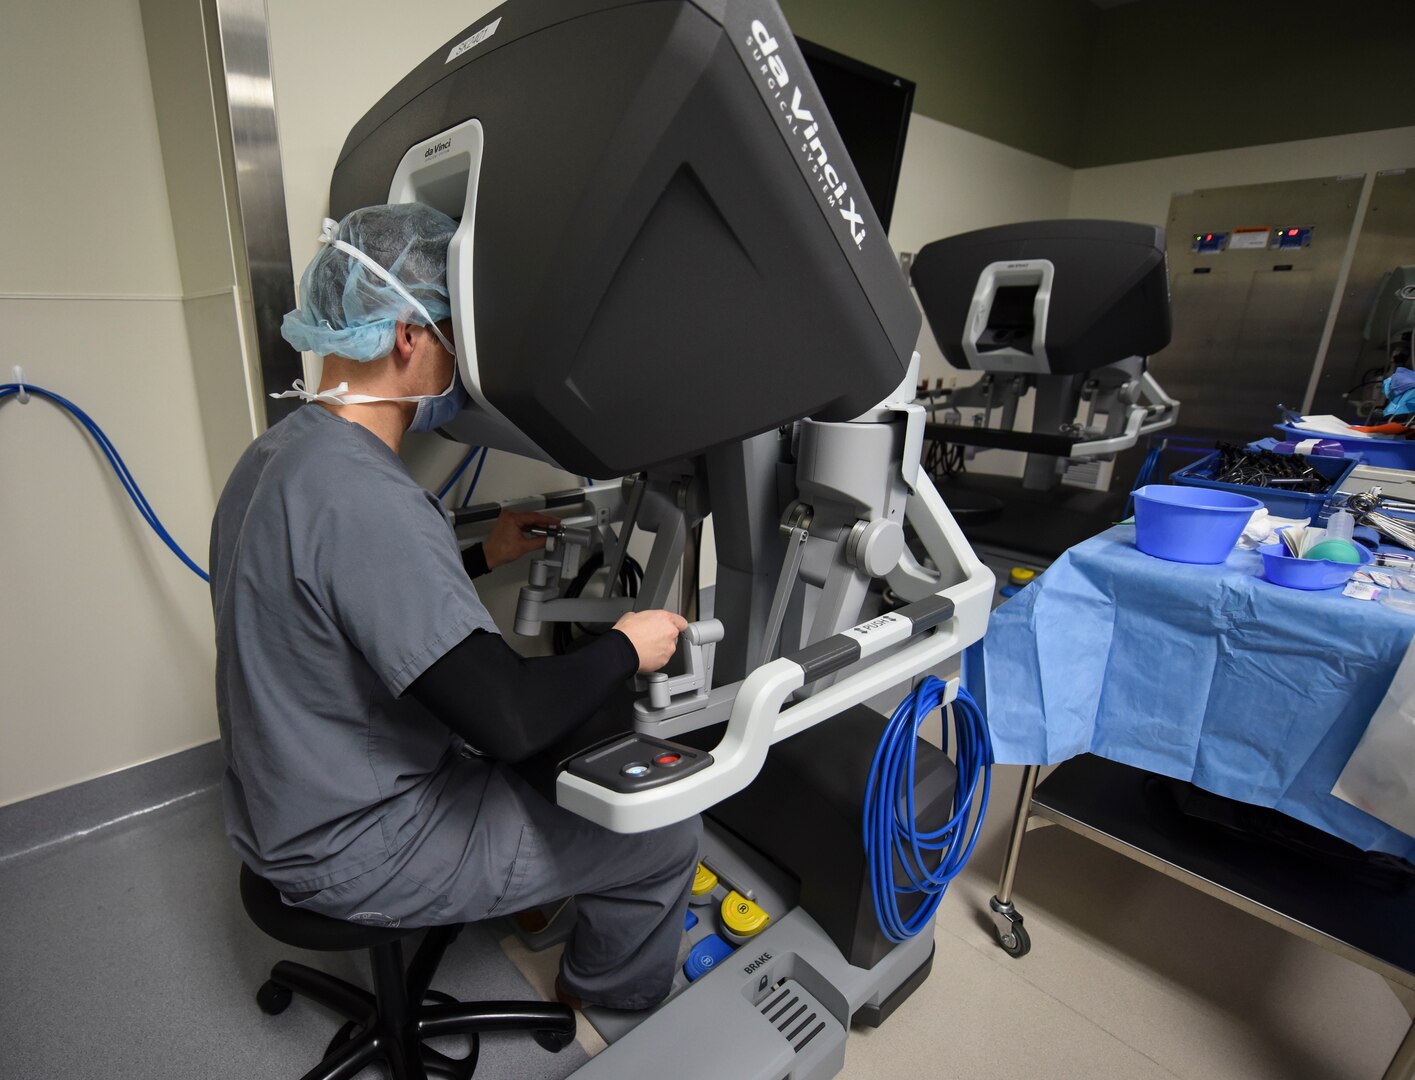 Maj. William Scott, 99th Surgical Operations Squadron general surgeon, performs surgery using the da Vinci Surgery System at the Mike O’Callaghan Military Medical Center, Nellis Air Force Base, Nev., April 3, 2019. The console provides the surgeon with a magnified, three-dimensional view of the surgical site as the tower sits over the patient and performs the operation. (U.S. Air Force photo by Airman 1st Class Bailee A. Darbasie)